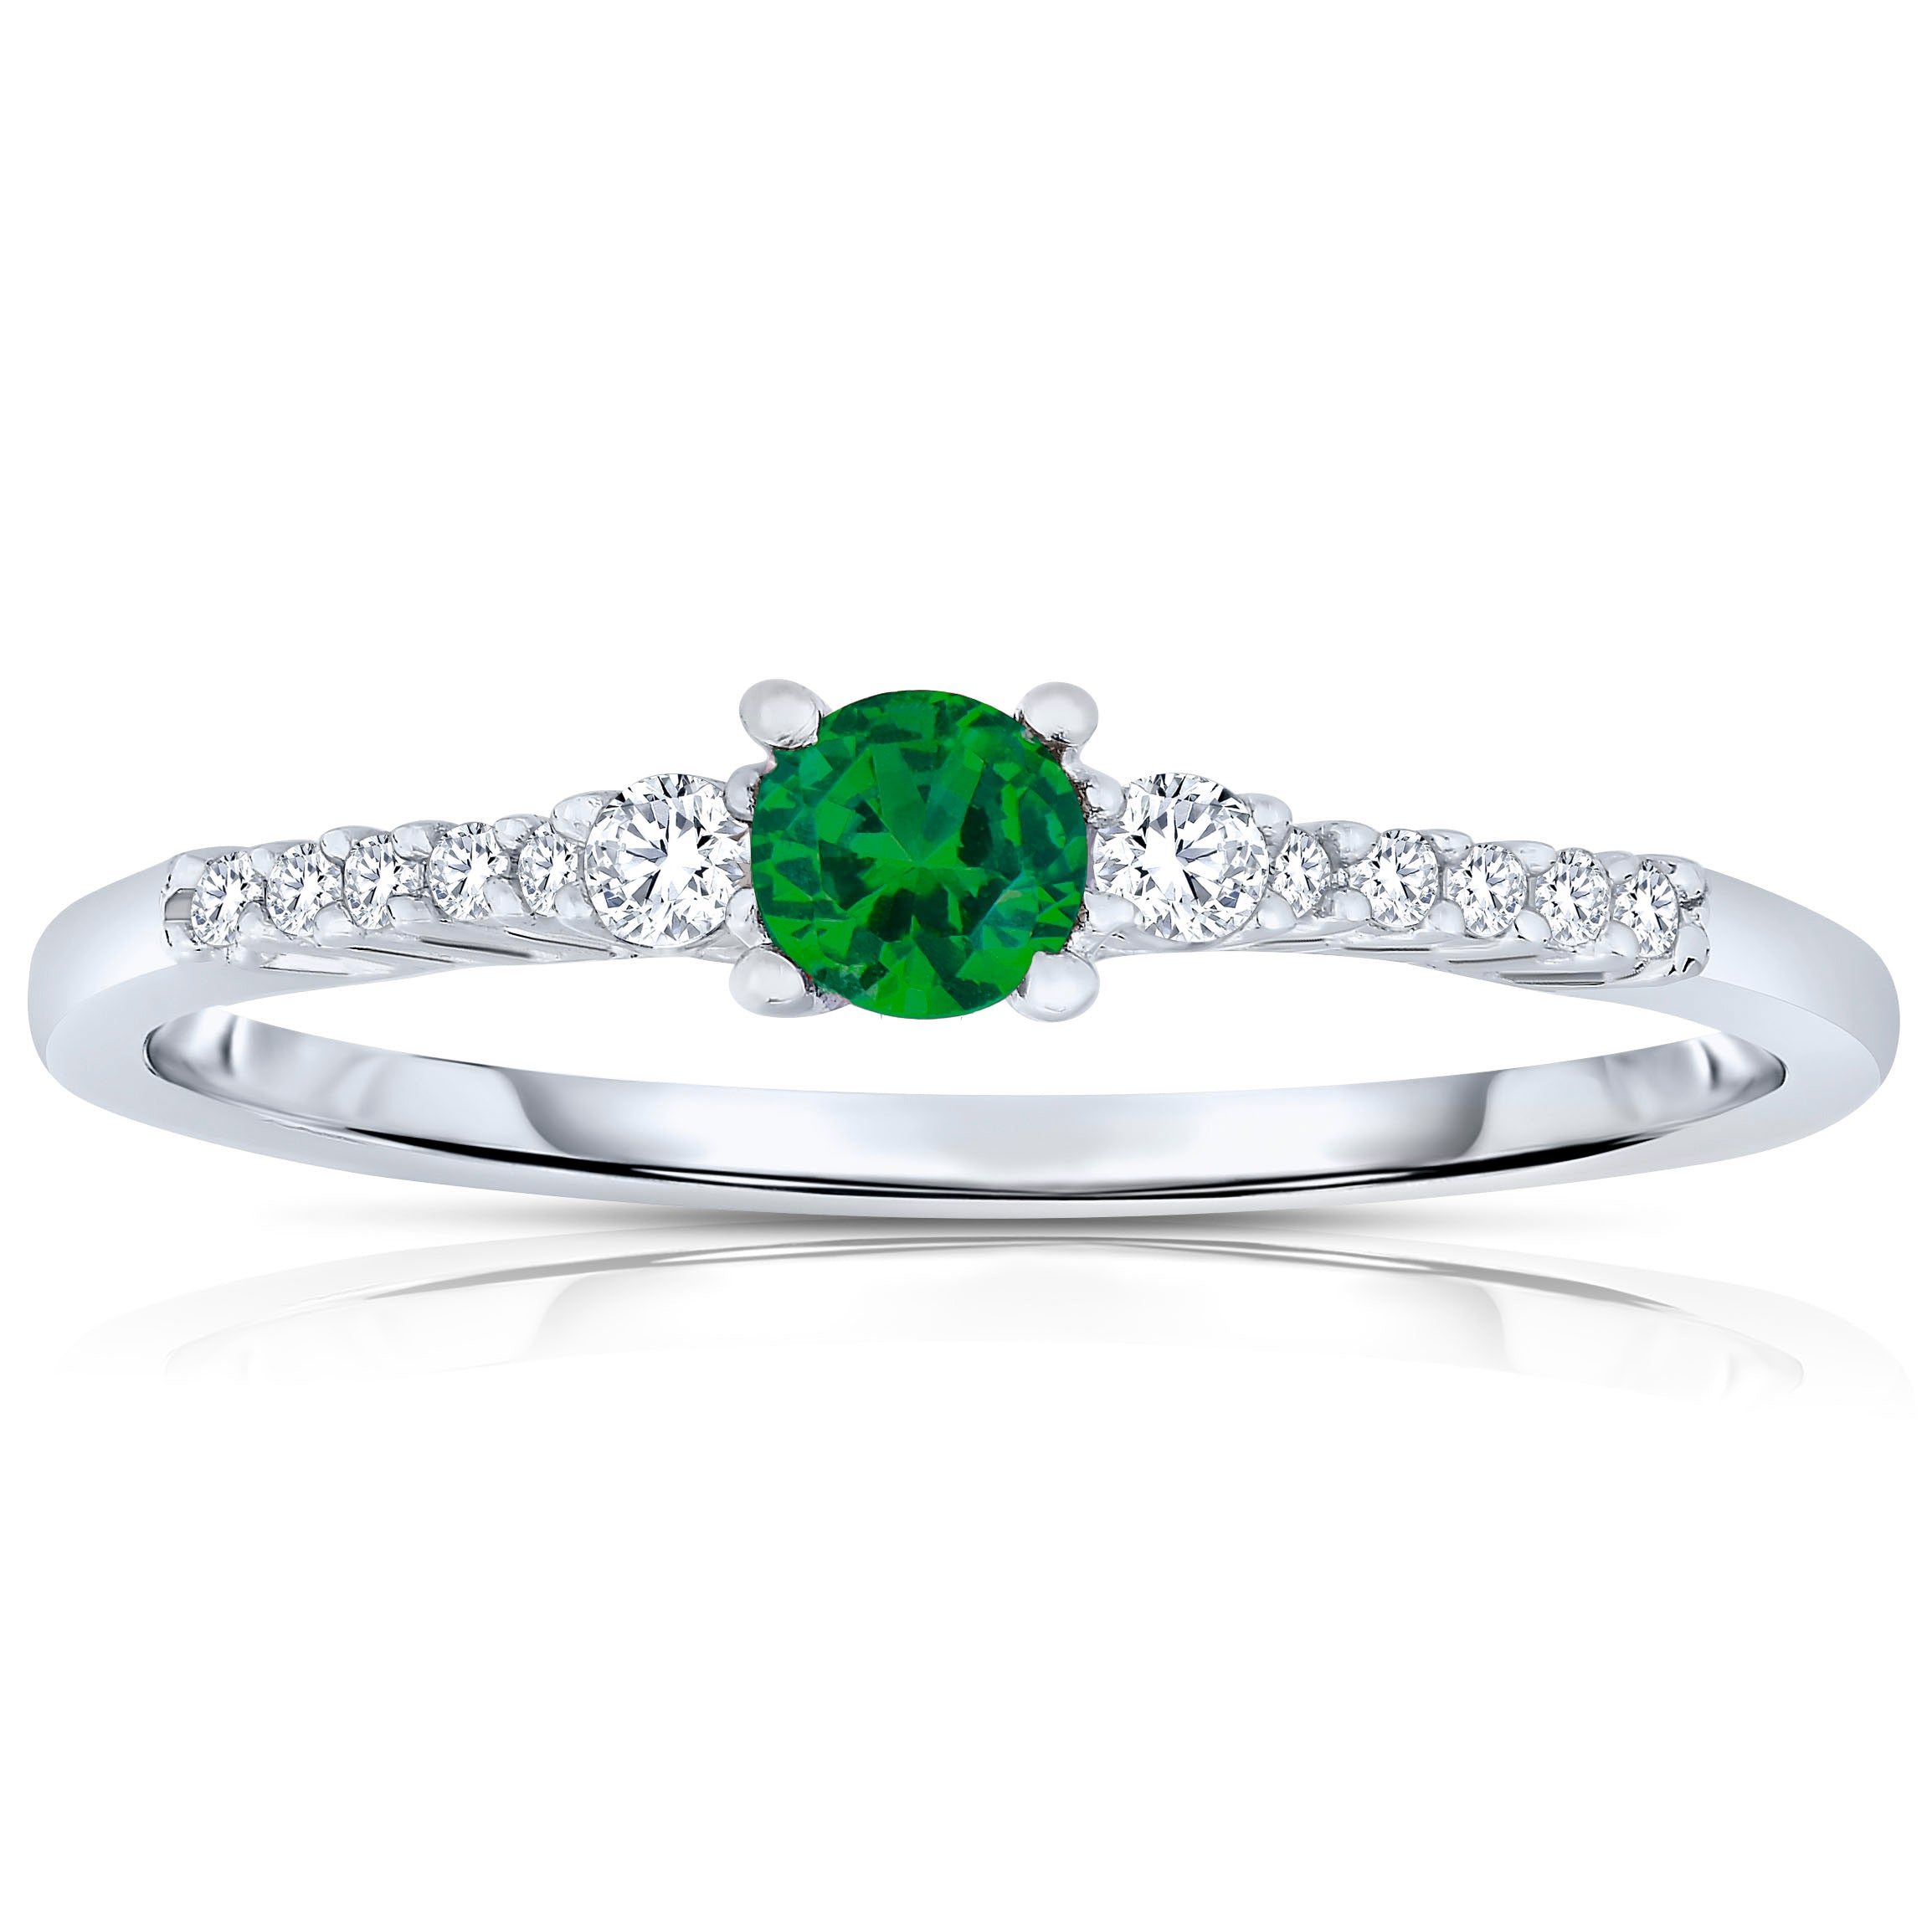 Women’s White / Silver / Green Sterling Silver Emerald Cubic Zirconia Engagement Ring Genevive Jewelry